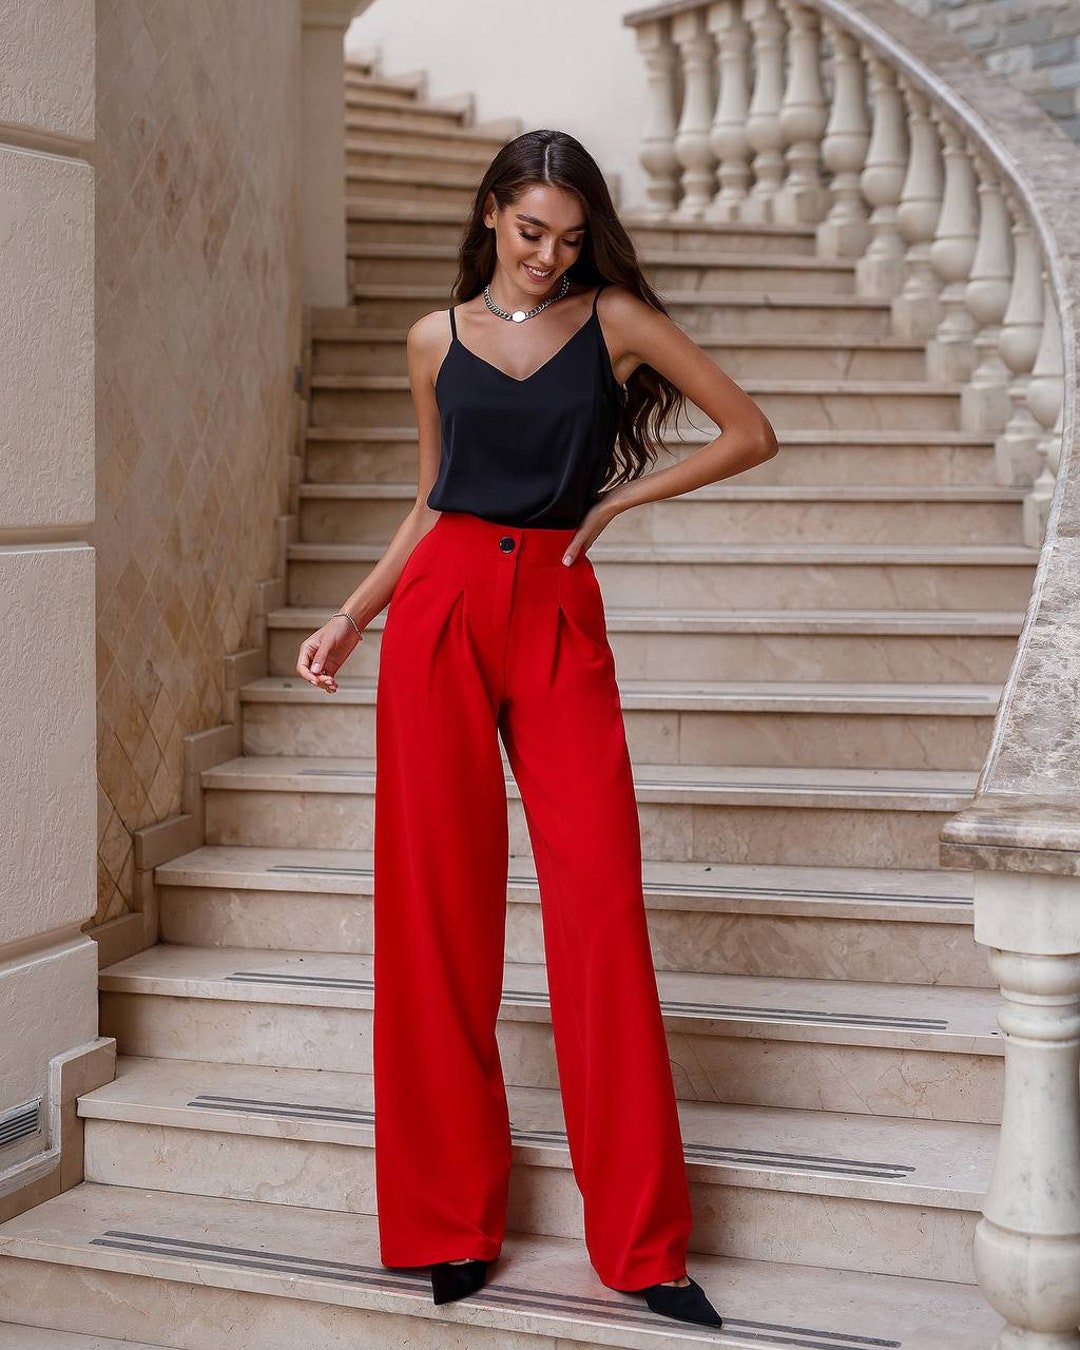 Oalirro Dress Pants for Women High Waisted Wide Leg Dress Pants for Women  Fall and Winter Fashion Casual Slacks Red 2XL 